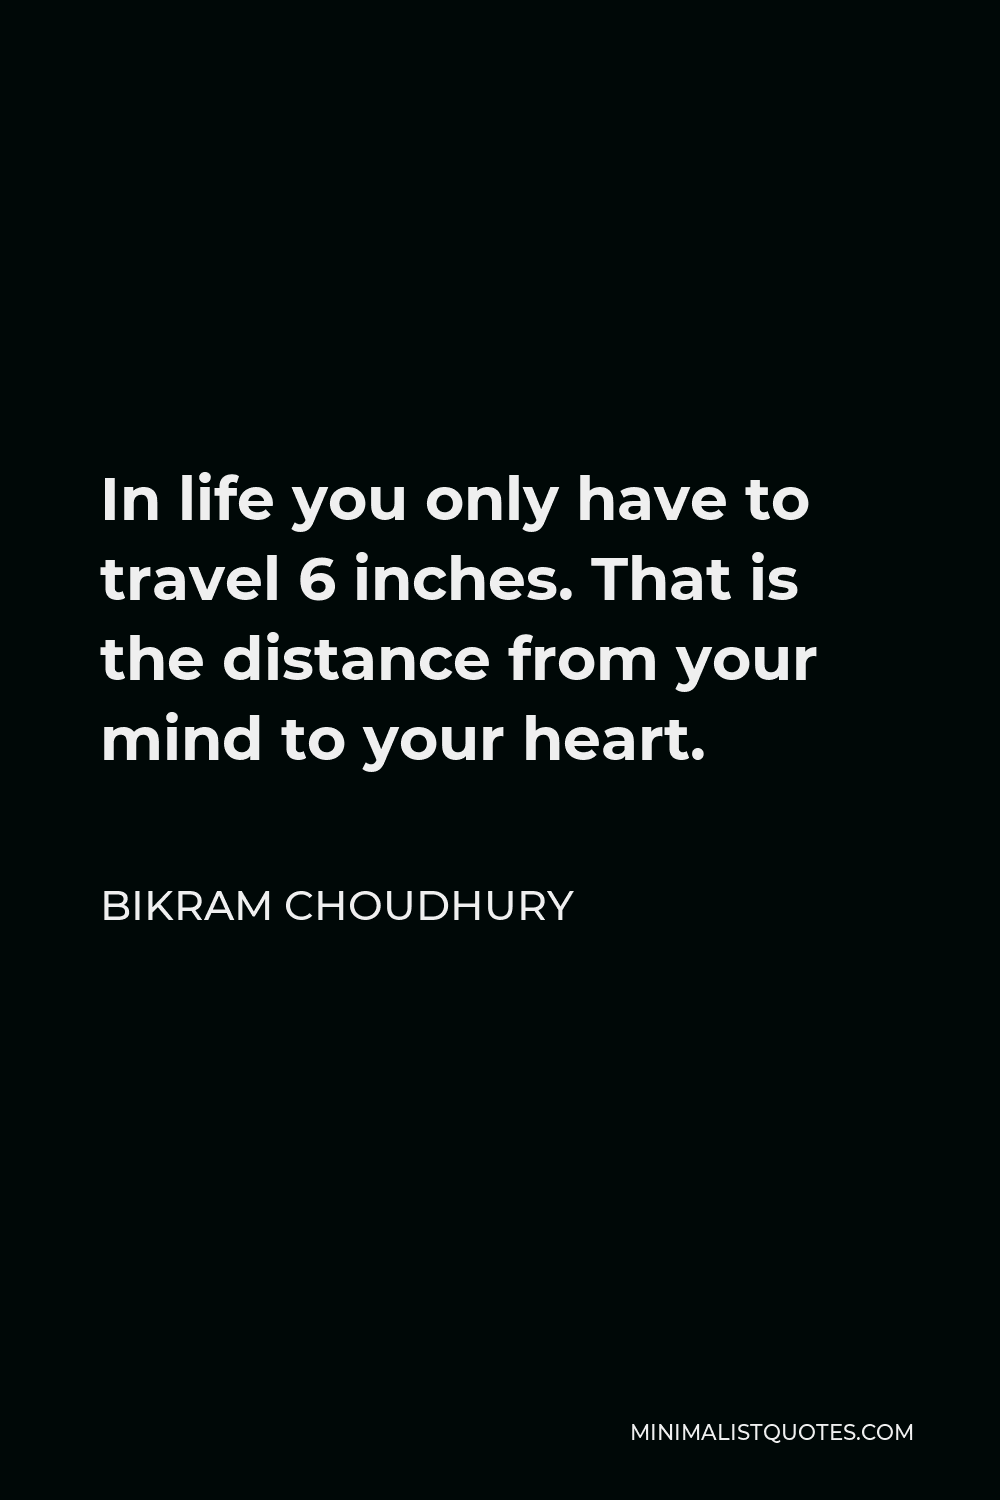 Bikram Choudhury Quote - In life you only have to travel 6 inches. That is the distance from your mind to your heart.